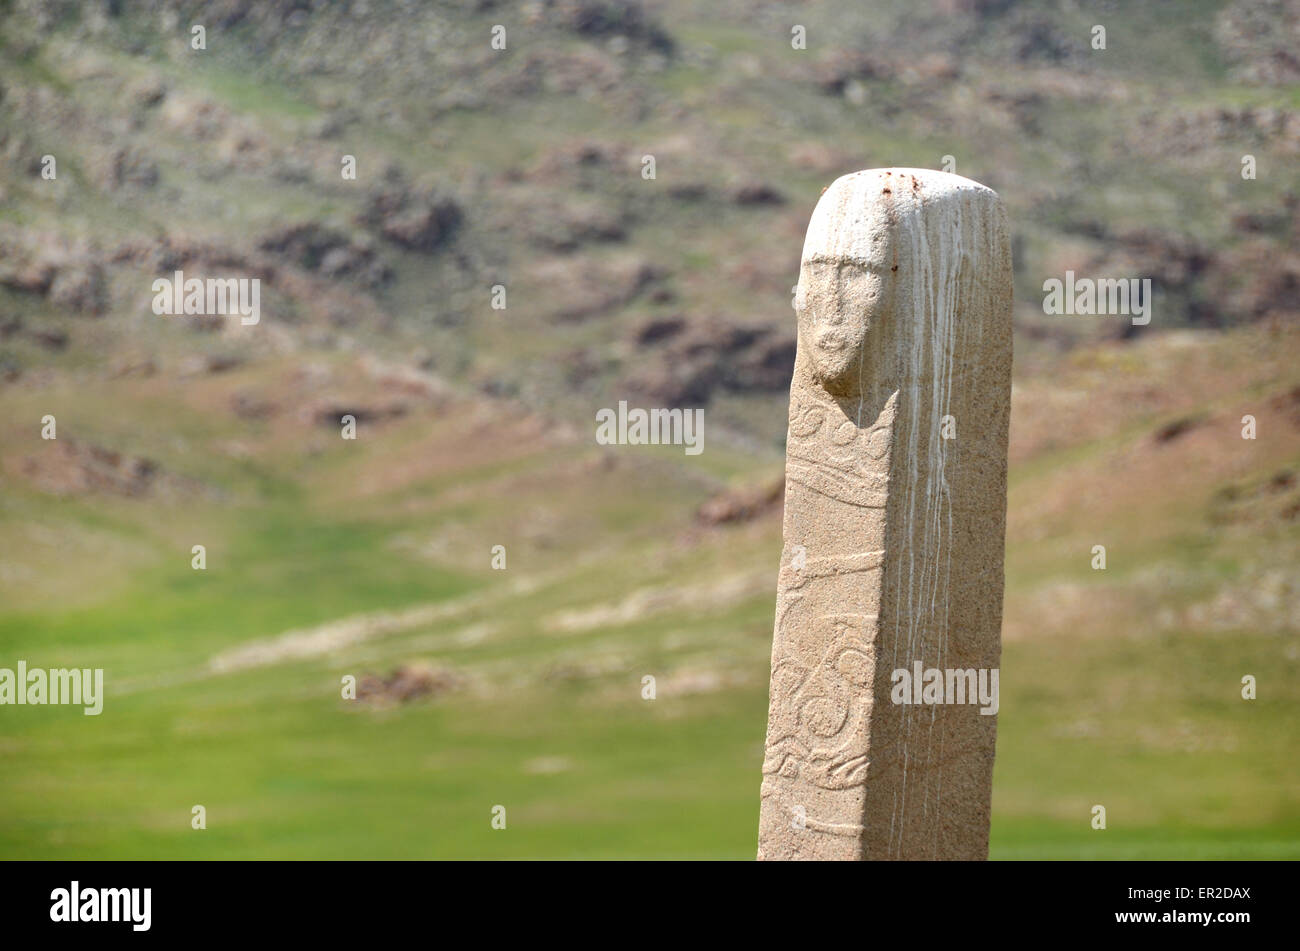 Detail of a deer stone with a human face near the city of Moron, Ovsgol province, northern Mongolia. Stock Photo